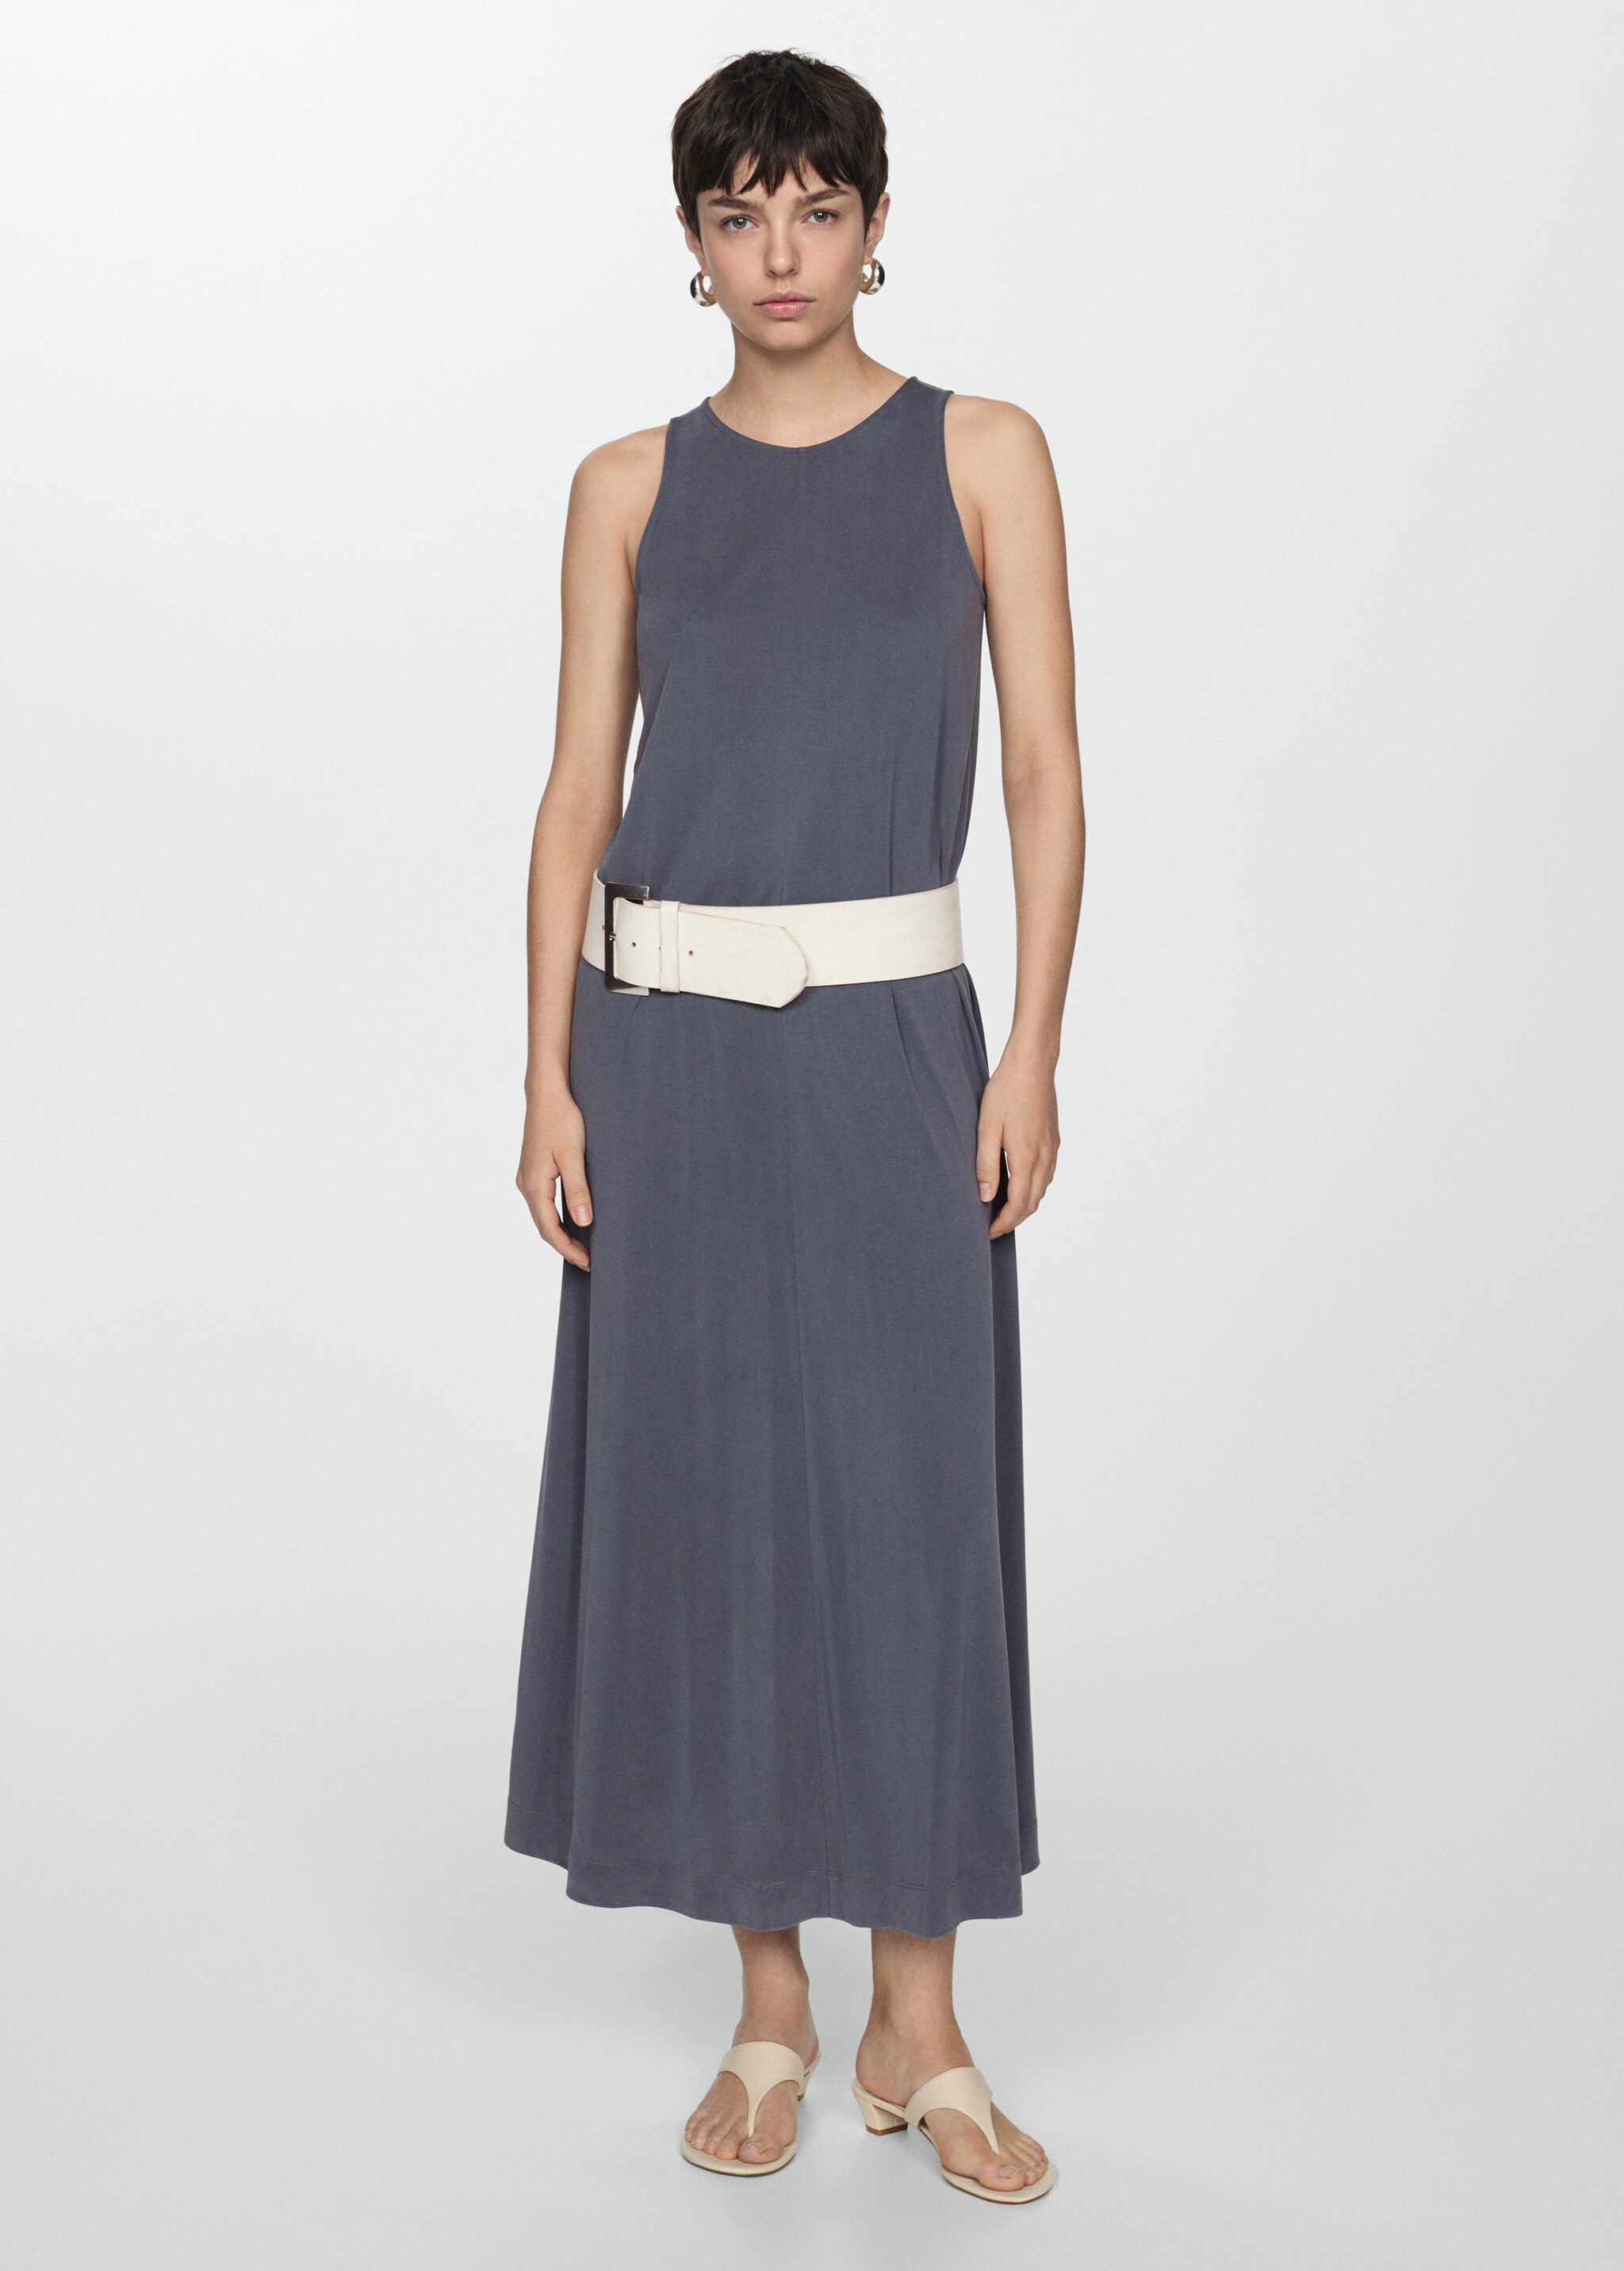 Long dress with straps - General plane